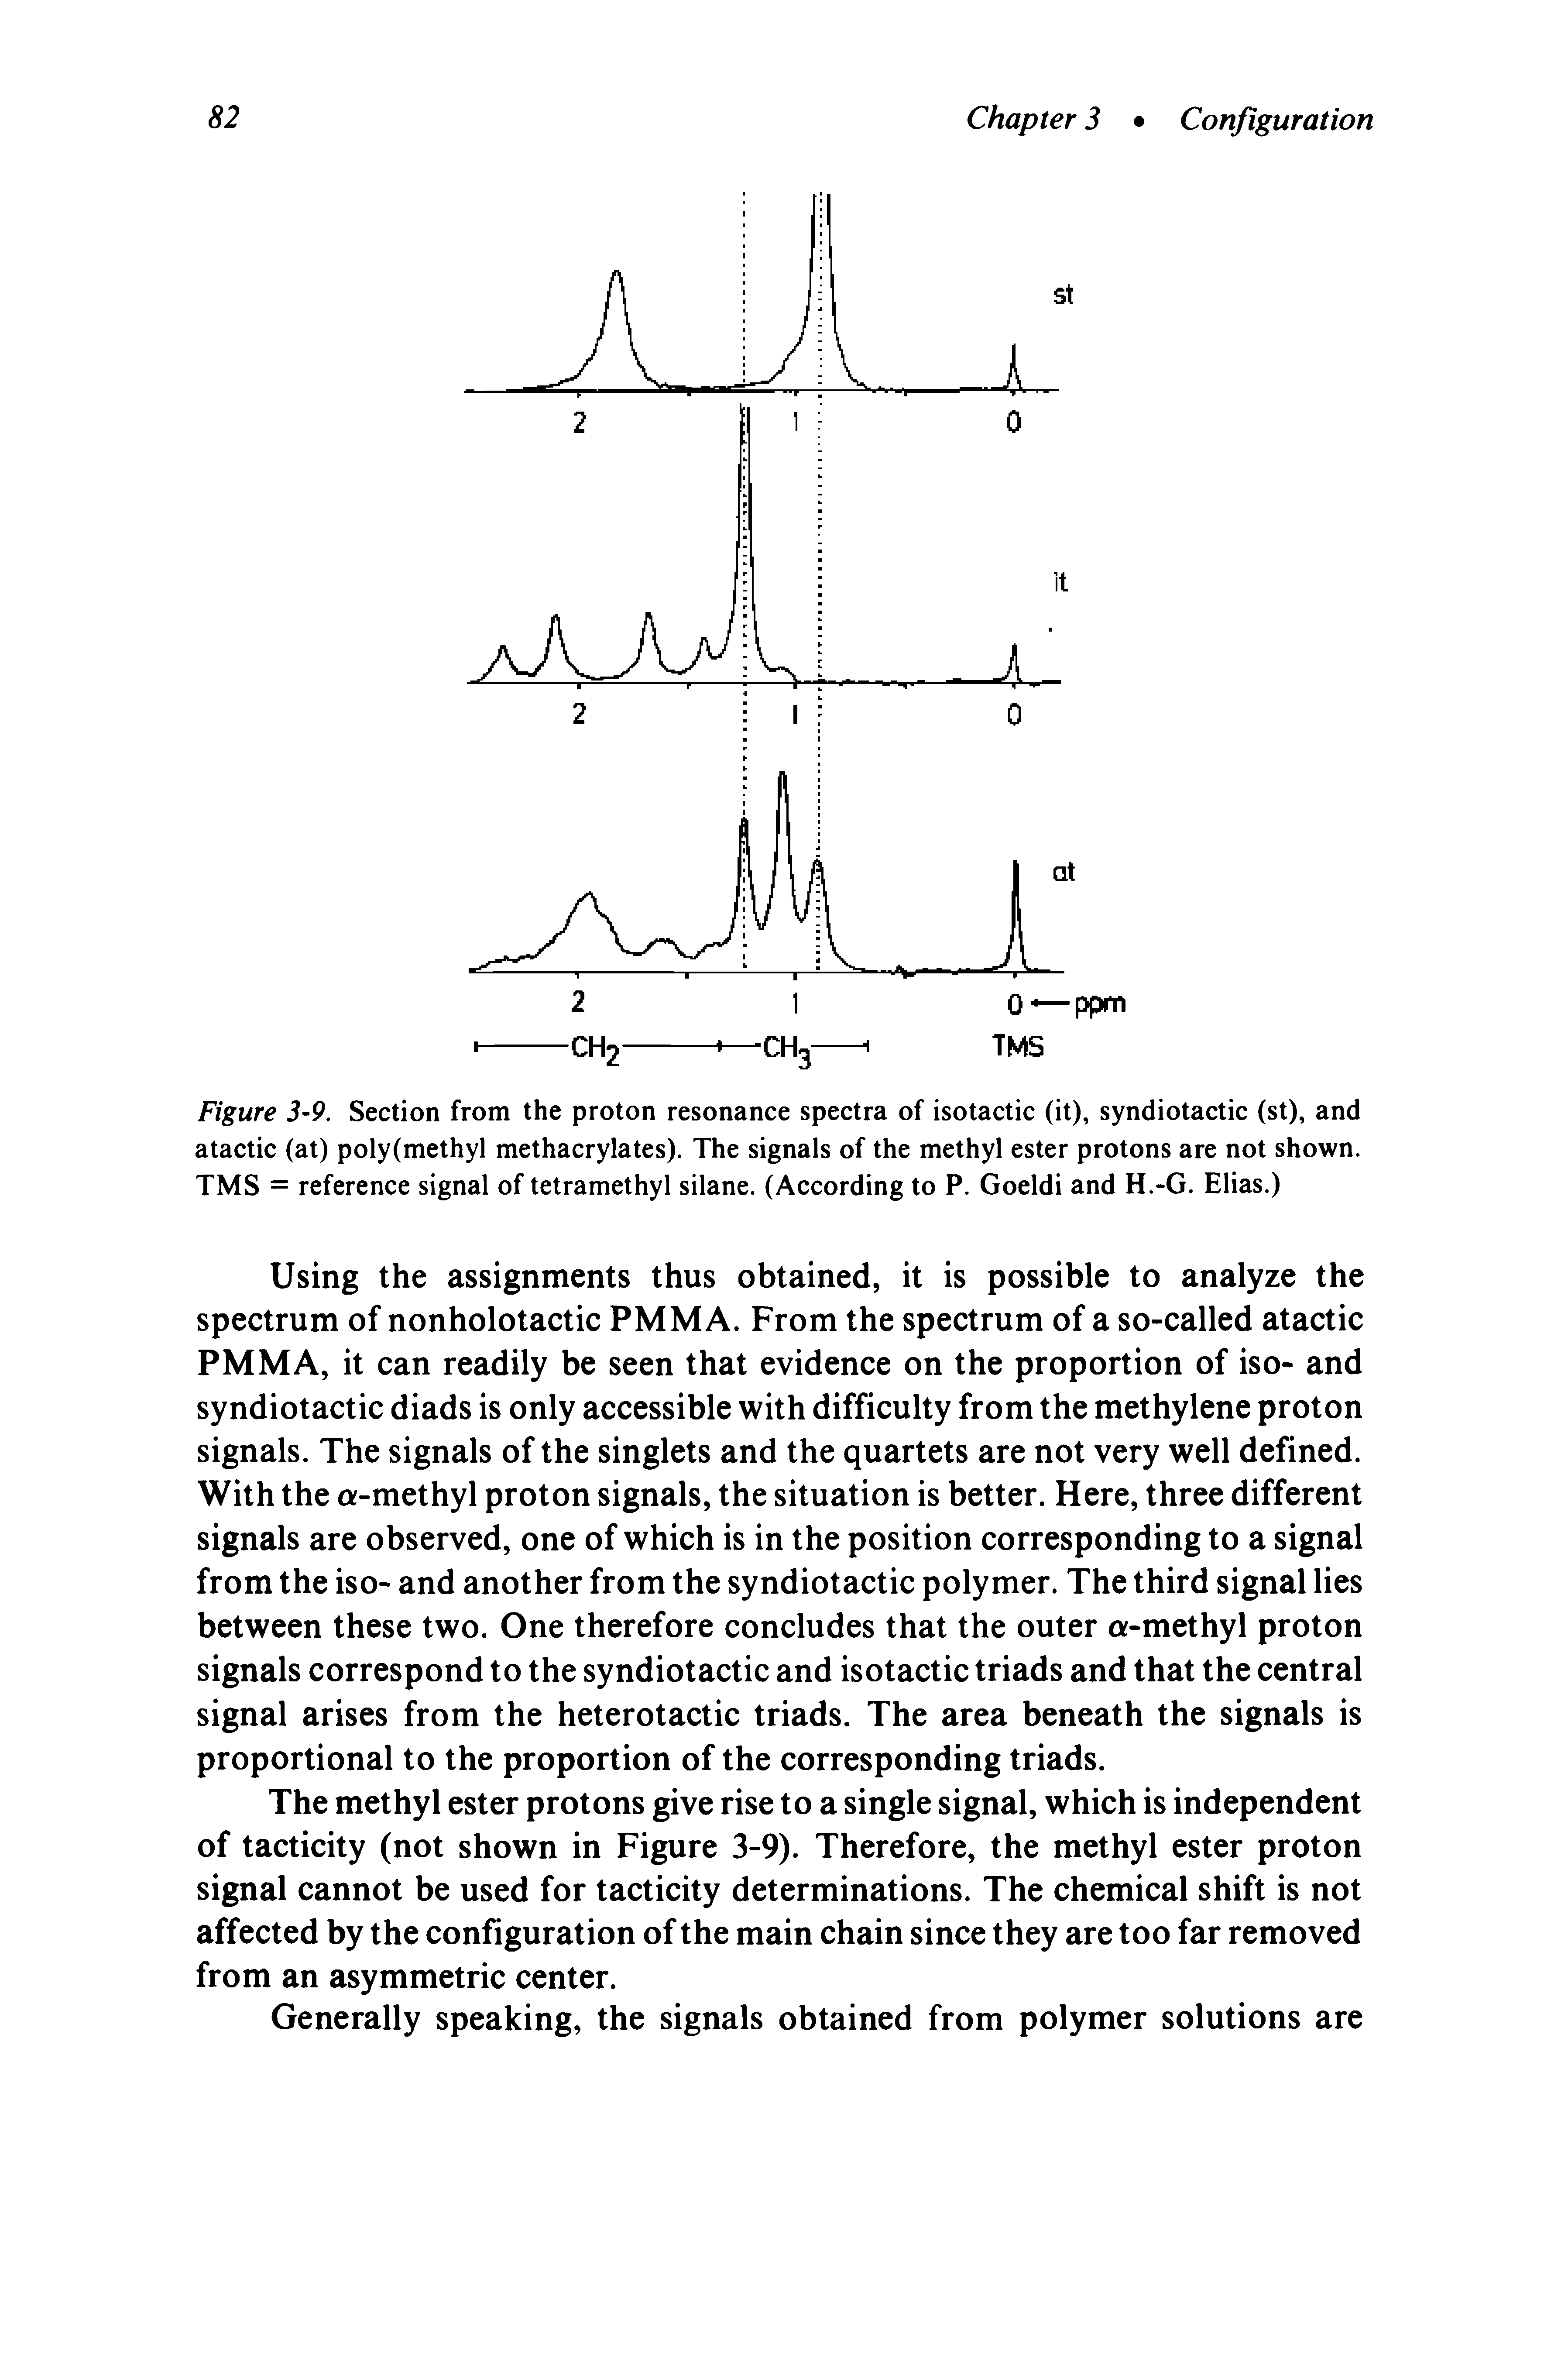 Figure 3-9. Section from the proton resonance spectra of isotactic (it), syndiotactic (st), and atactic (at) poly(methyl methacrylates). The signals of the methyl ester protons are not shown. TMS = reference signal of tetramethyl silane. (According to P. Goeldi and H.-G. Elias.)...